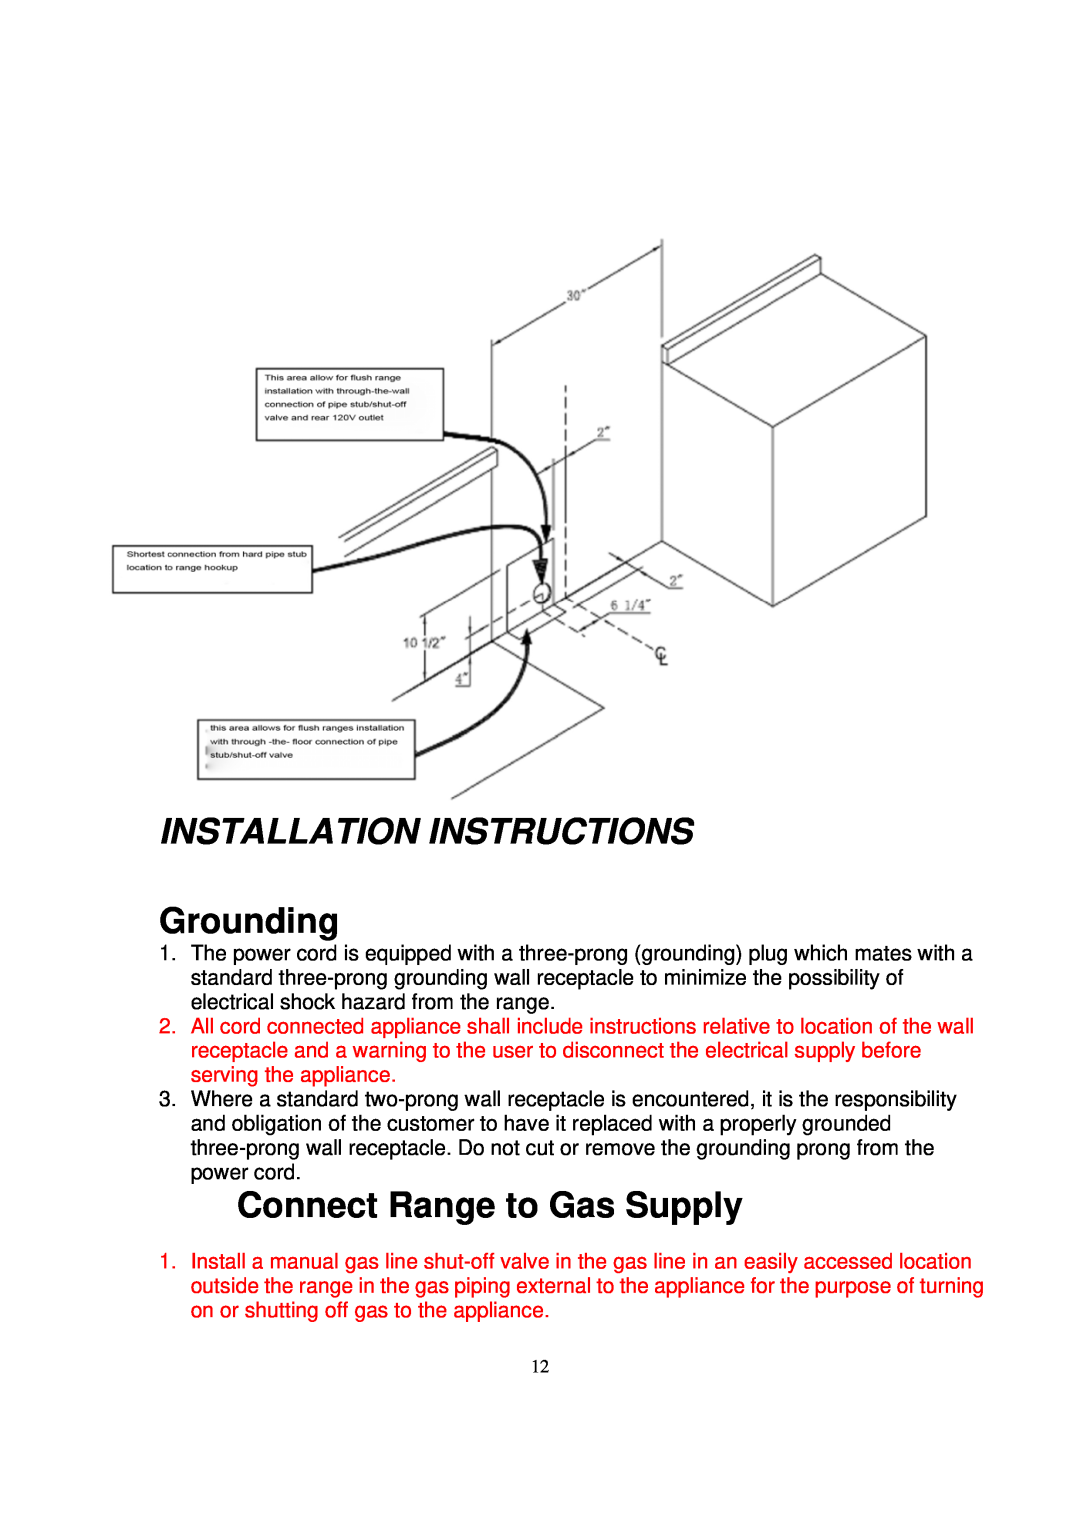 NXR DRGB4801, BX3031, BX3062 manual Installation Instructions, Grounding, Connect Range to Gas Supply 